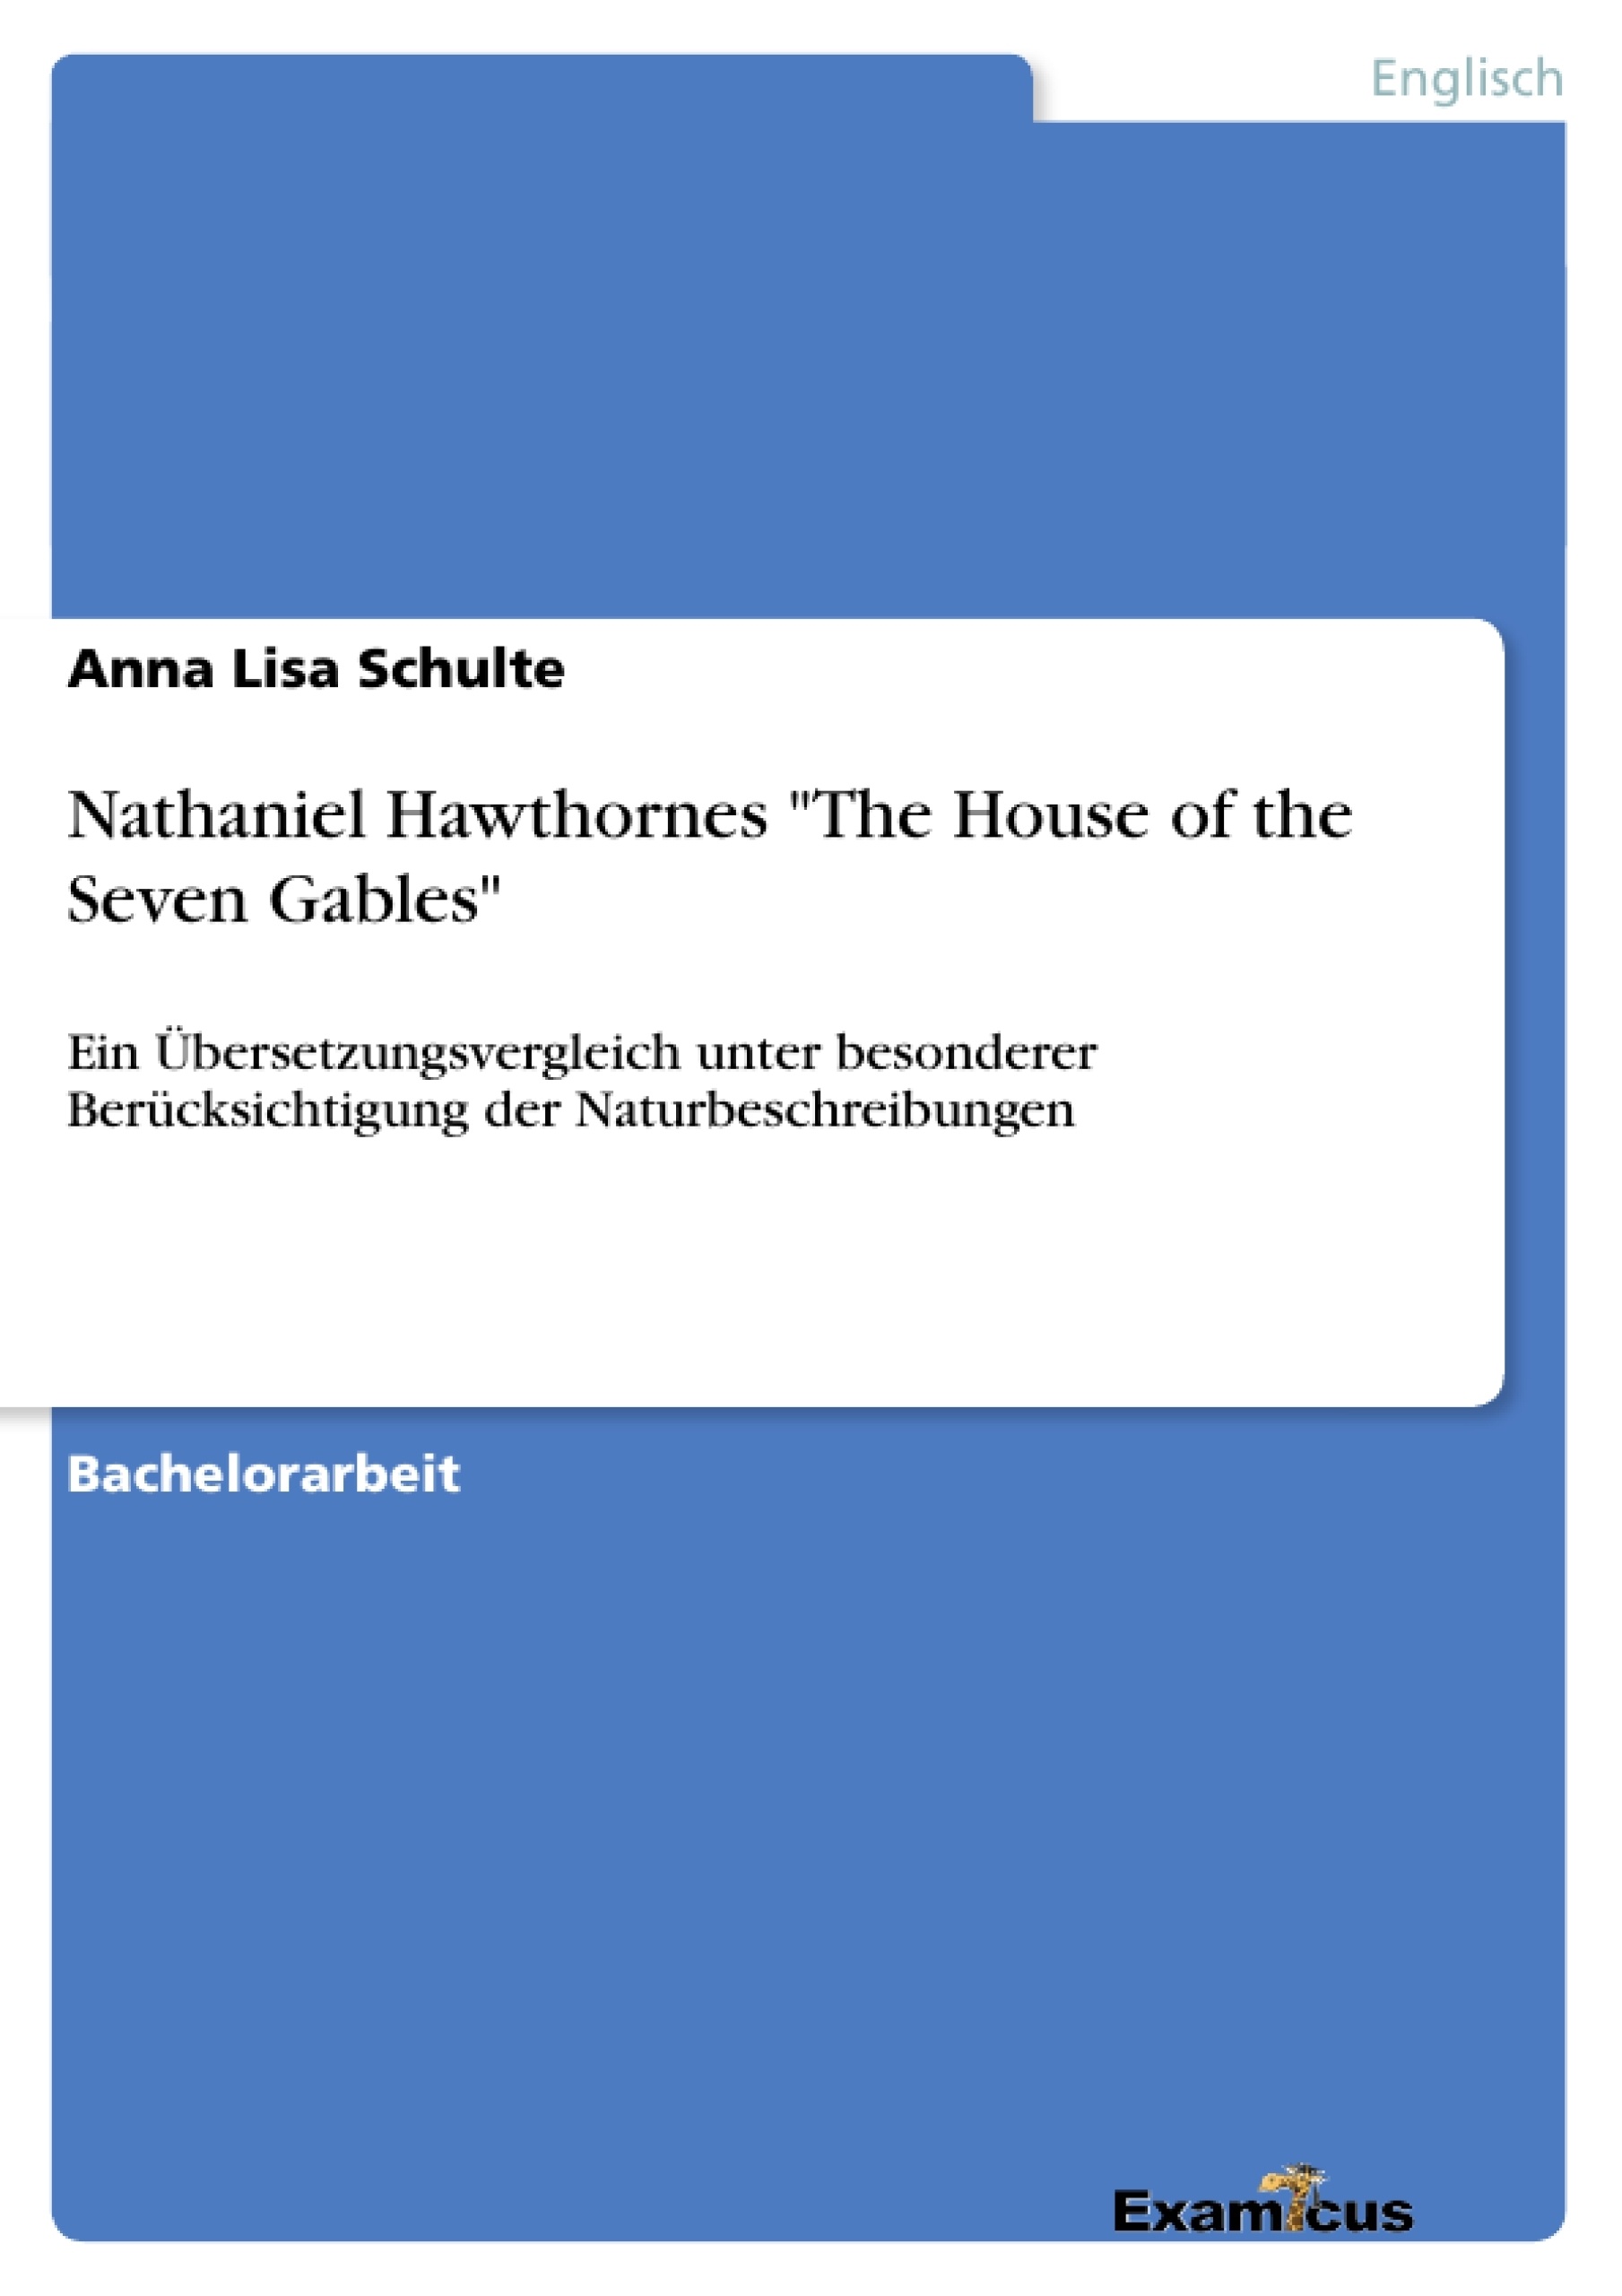 Titel: Nathaniel Hawthornes "The House of the Seven Gables"